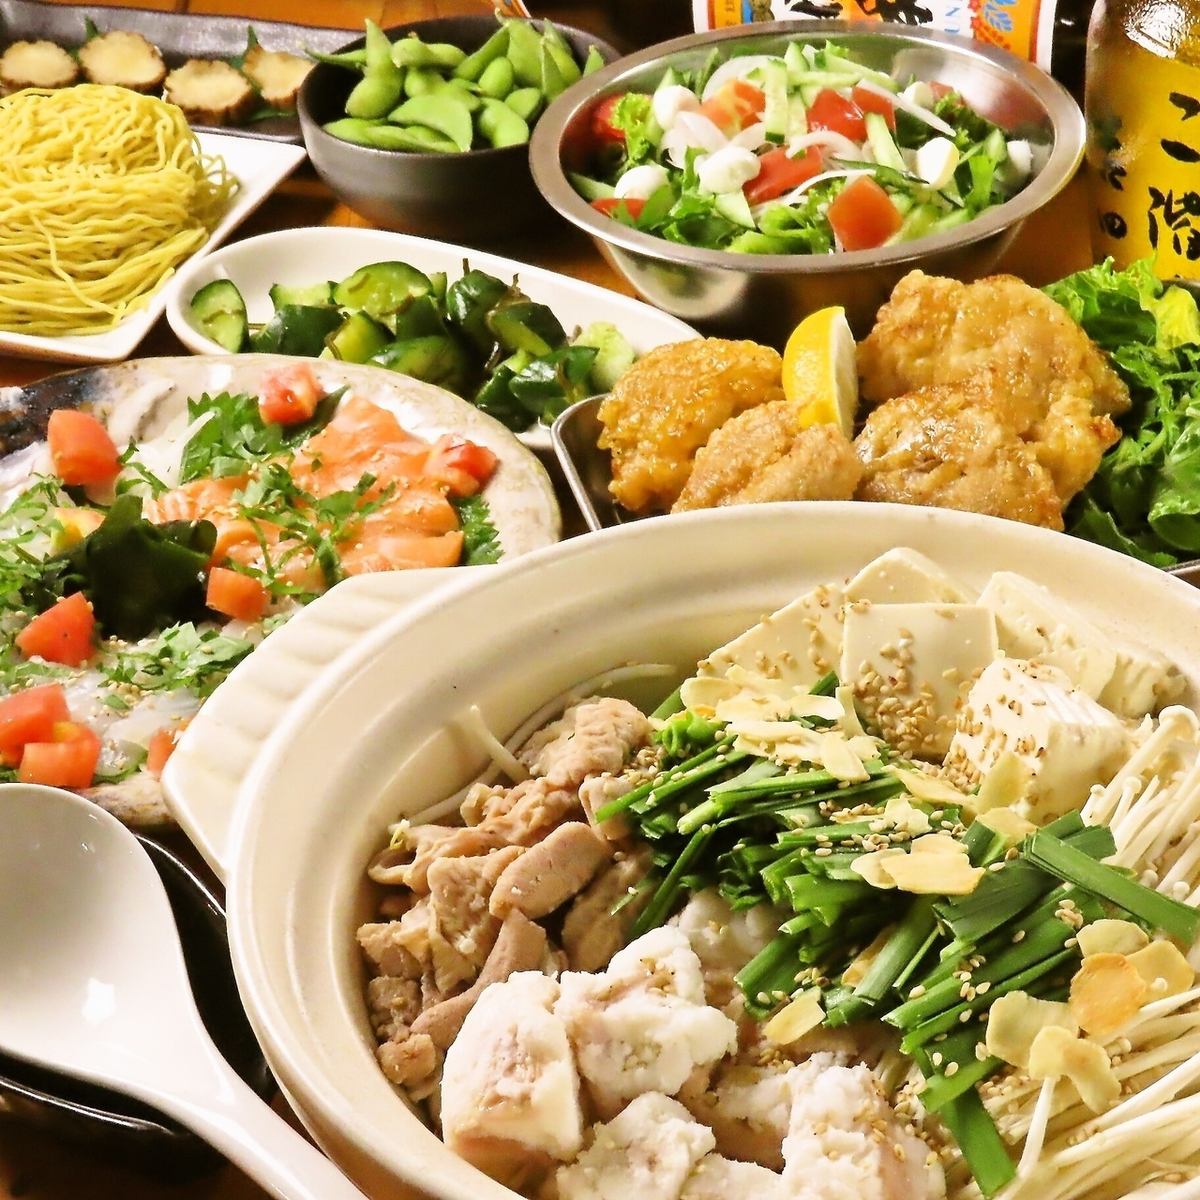 The chef's proud [Otsunabe] and [Chanko Nabe] are carefully selected from the ingredients.